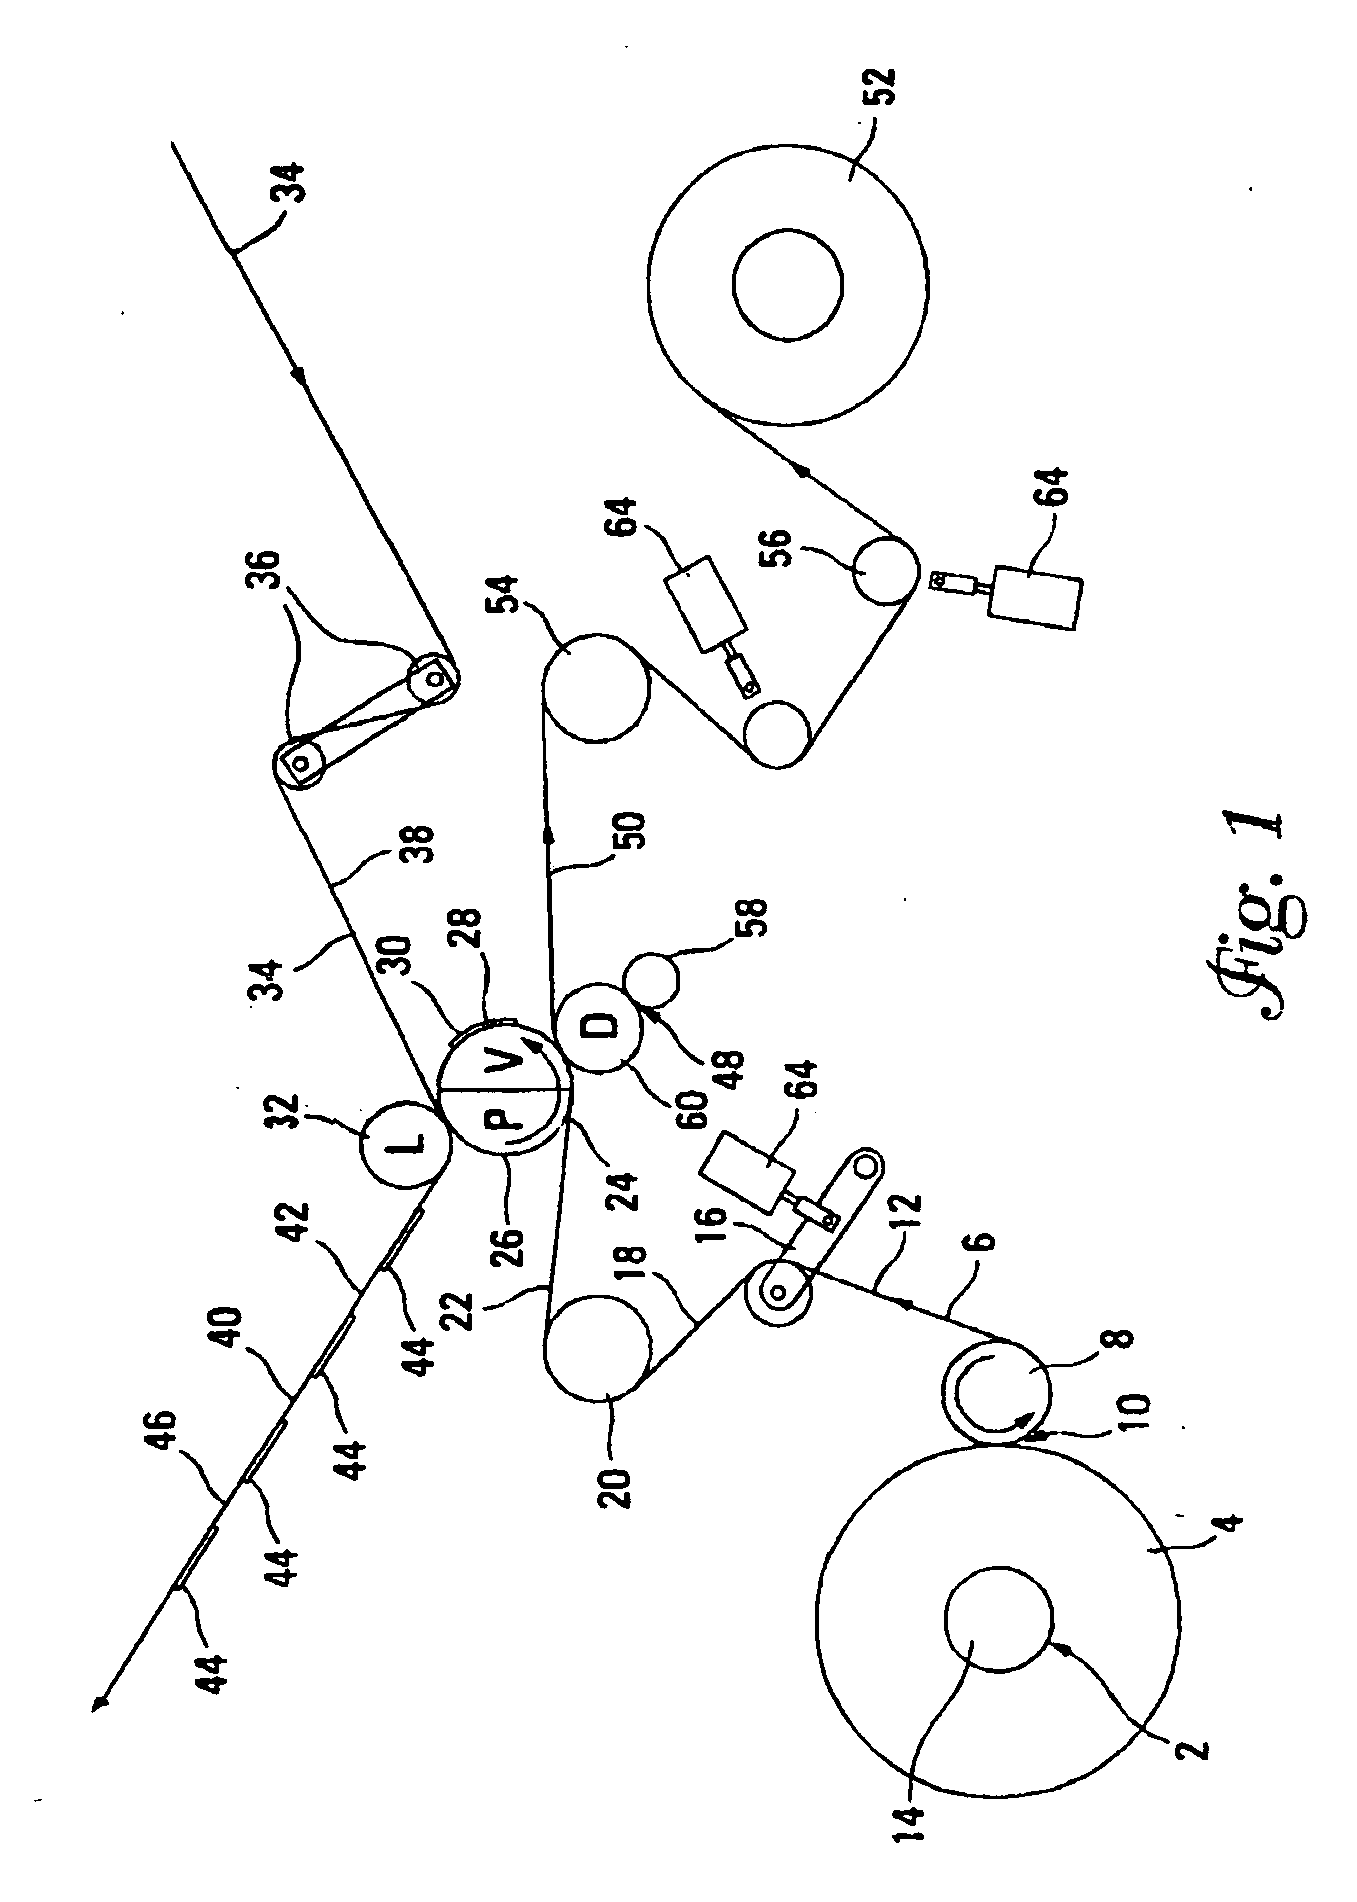 Apparatus and method for applying labels